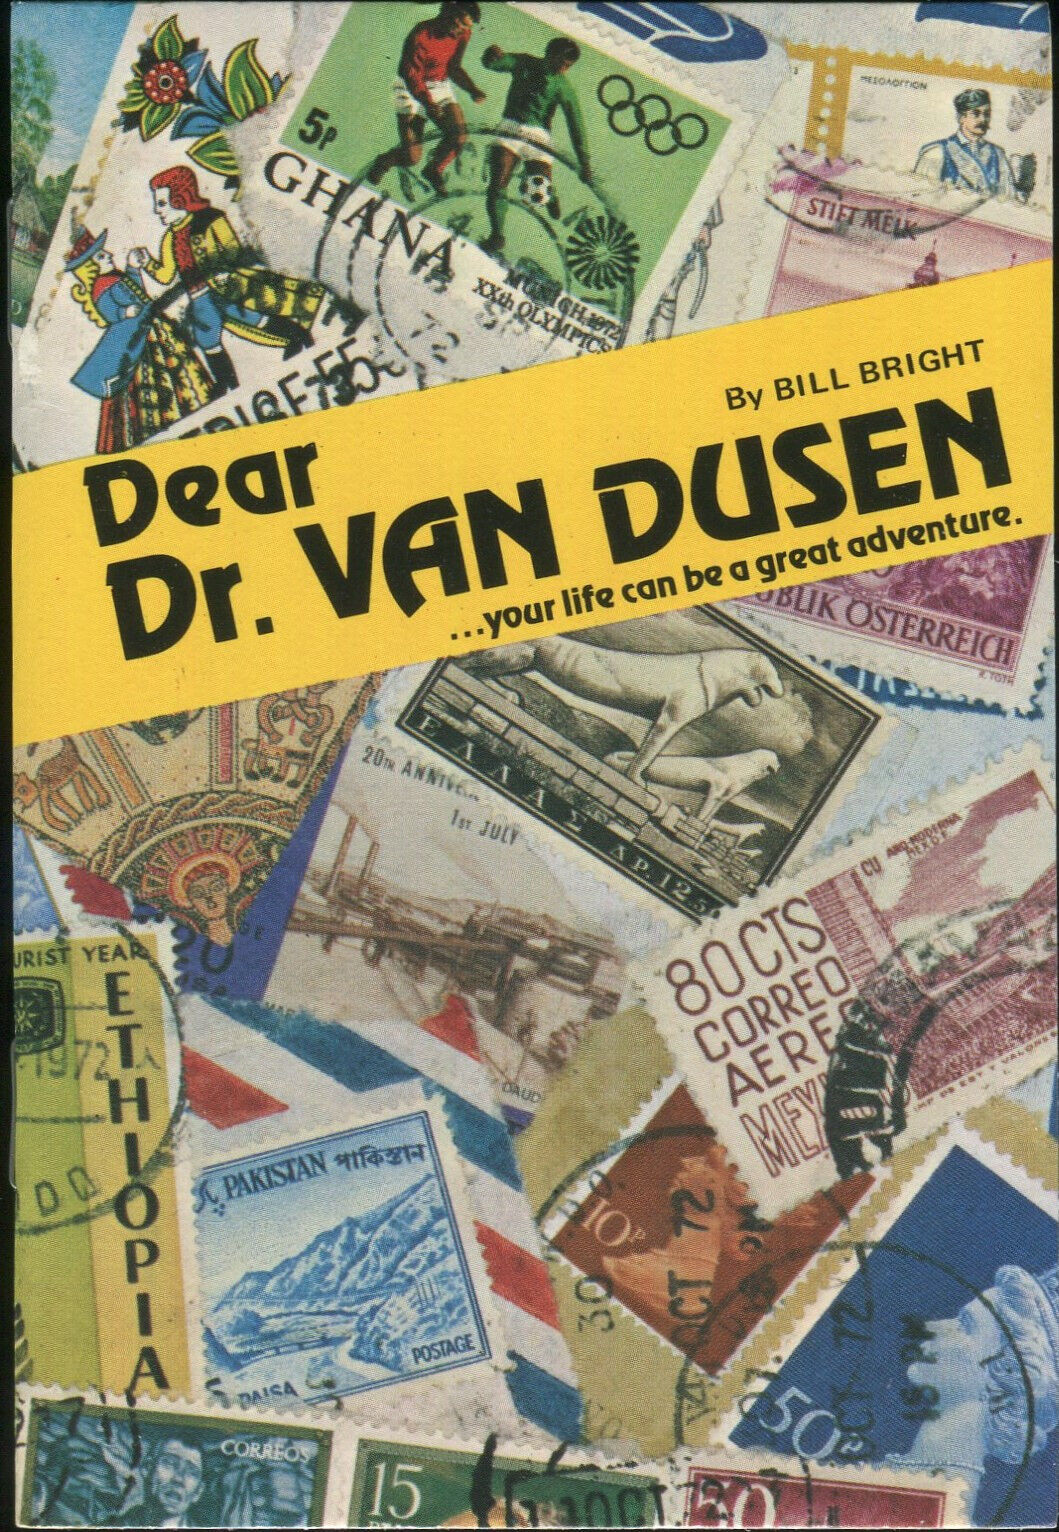 New 1959 Dear Dr. Van Dusen Campus Crusade For Christ Tract - Jack Chick